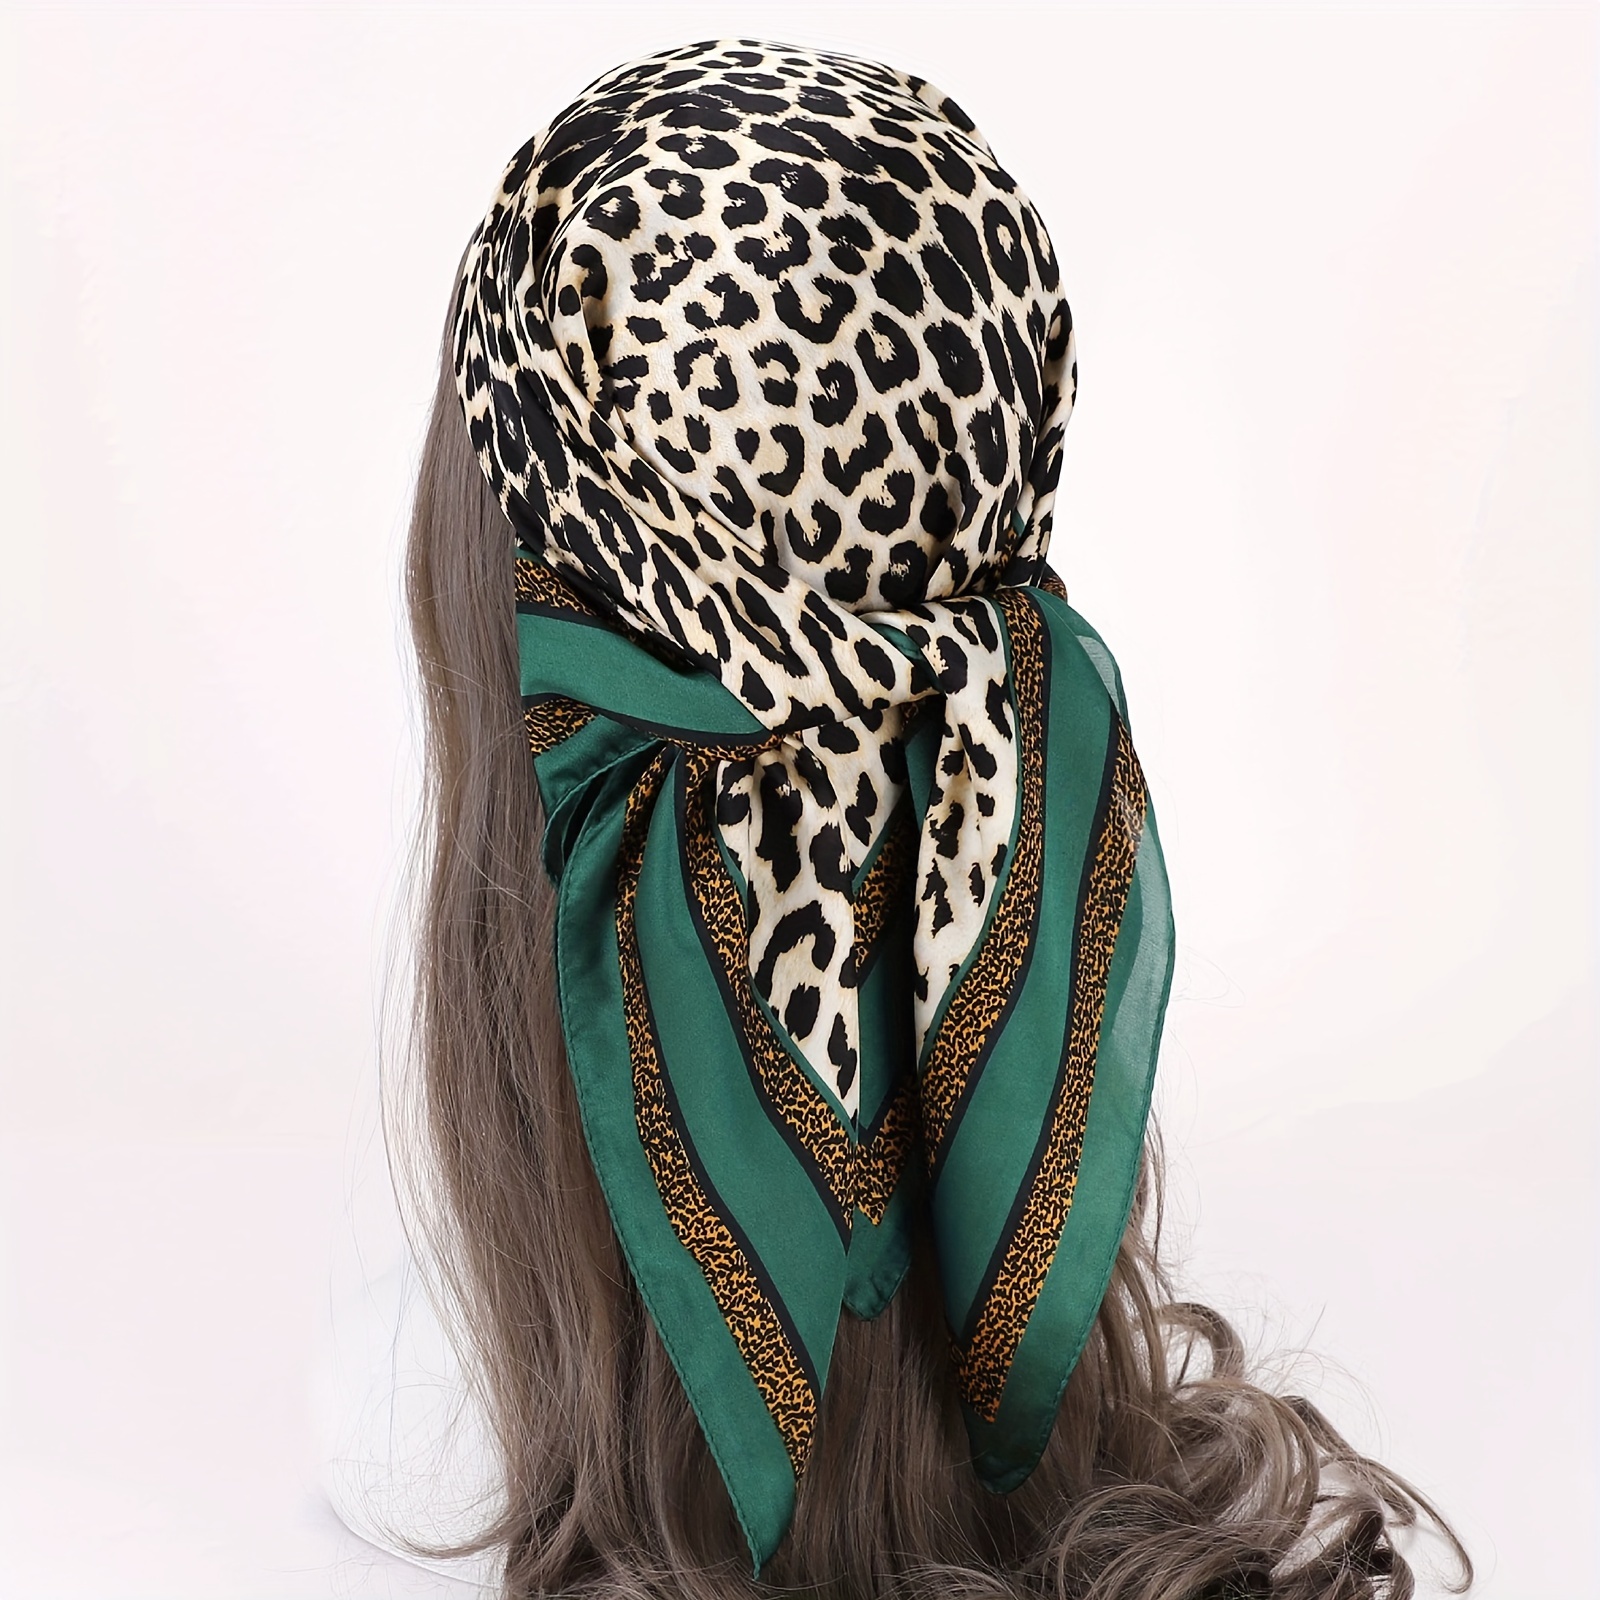 

27.55" Camel/green Leopard Square Scarf, Stylish Thin Breathable Small Shawl, Sunscreen Windproof Headscarf For Women Daily Wear